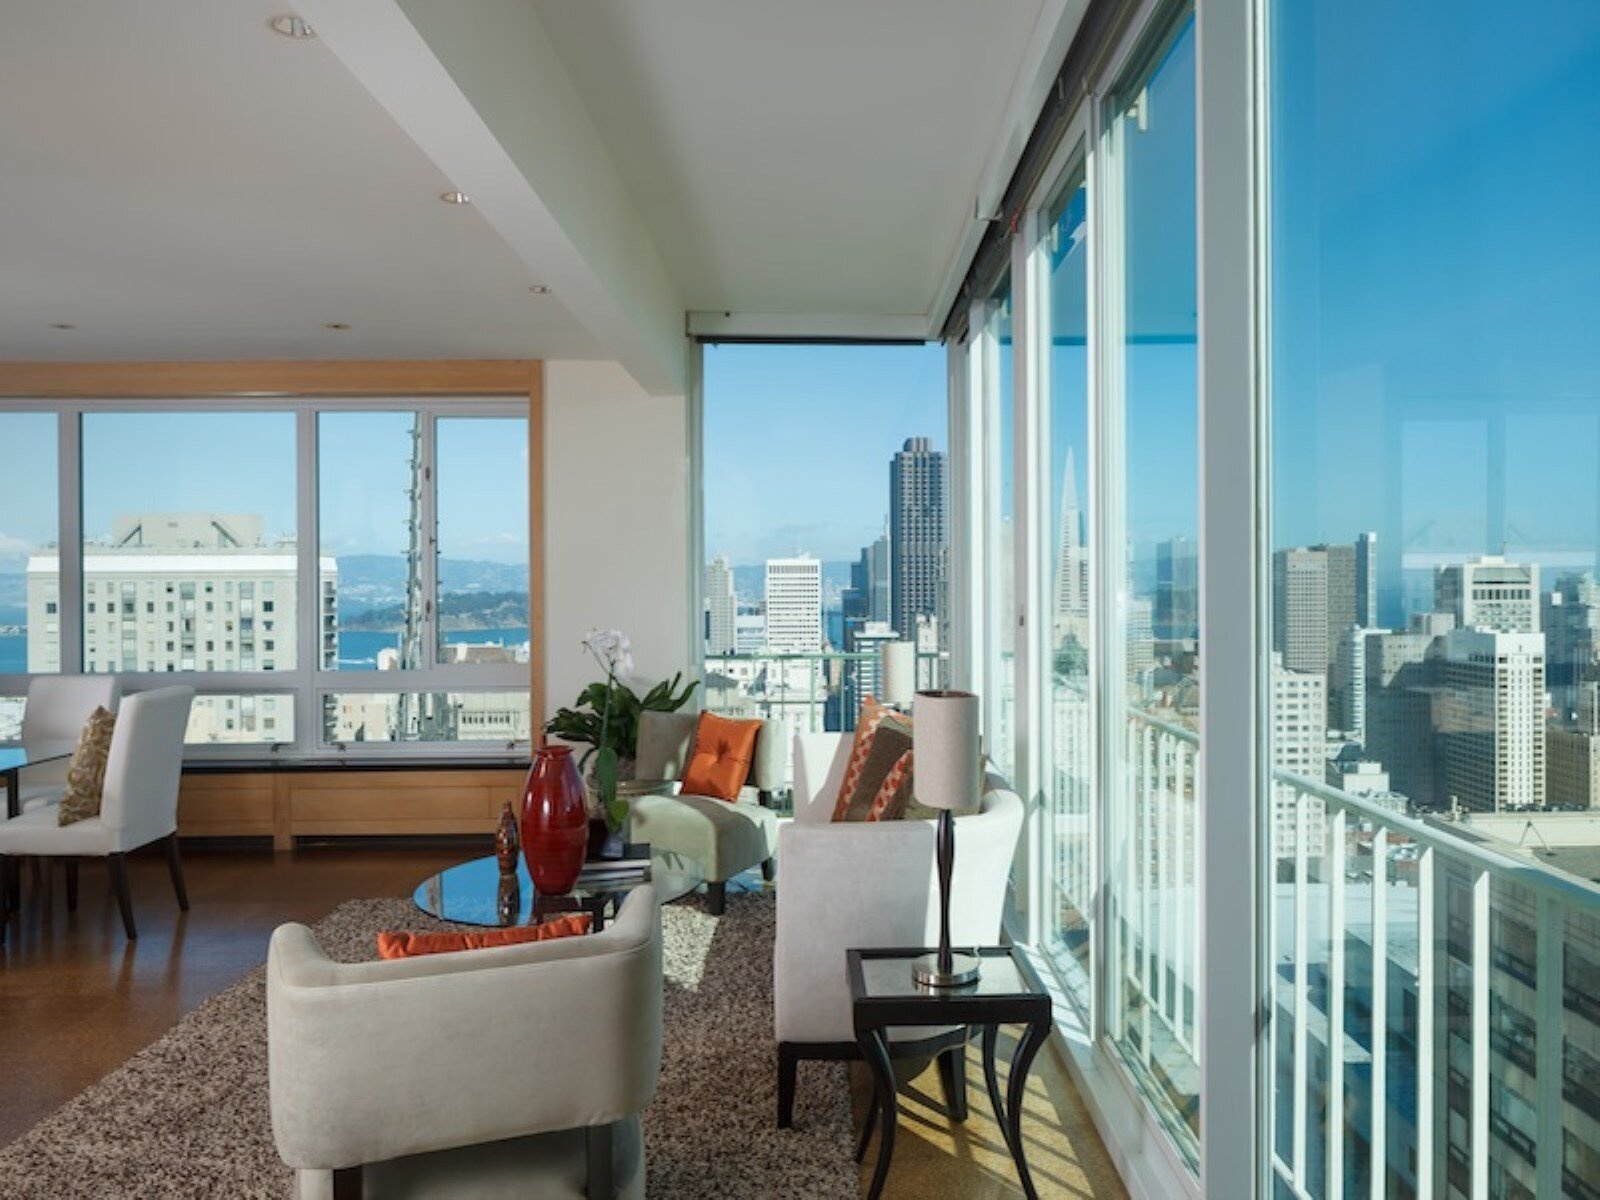 Apartment with majestic view over the city of San Francisco